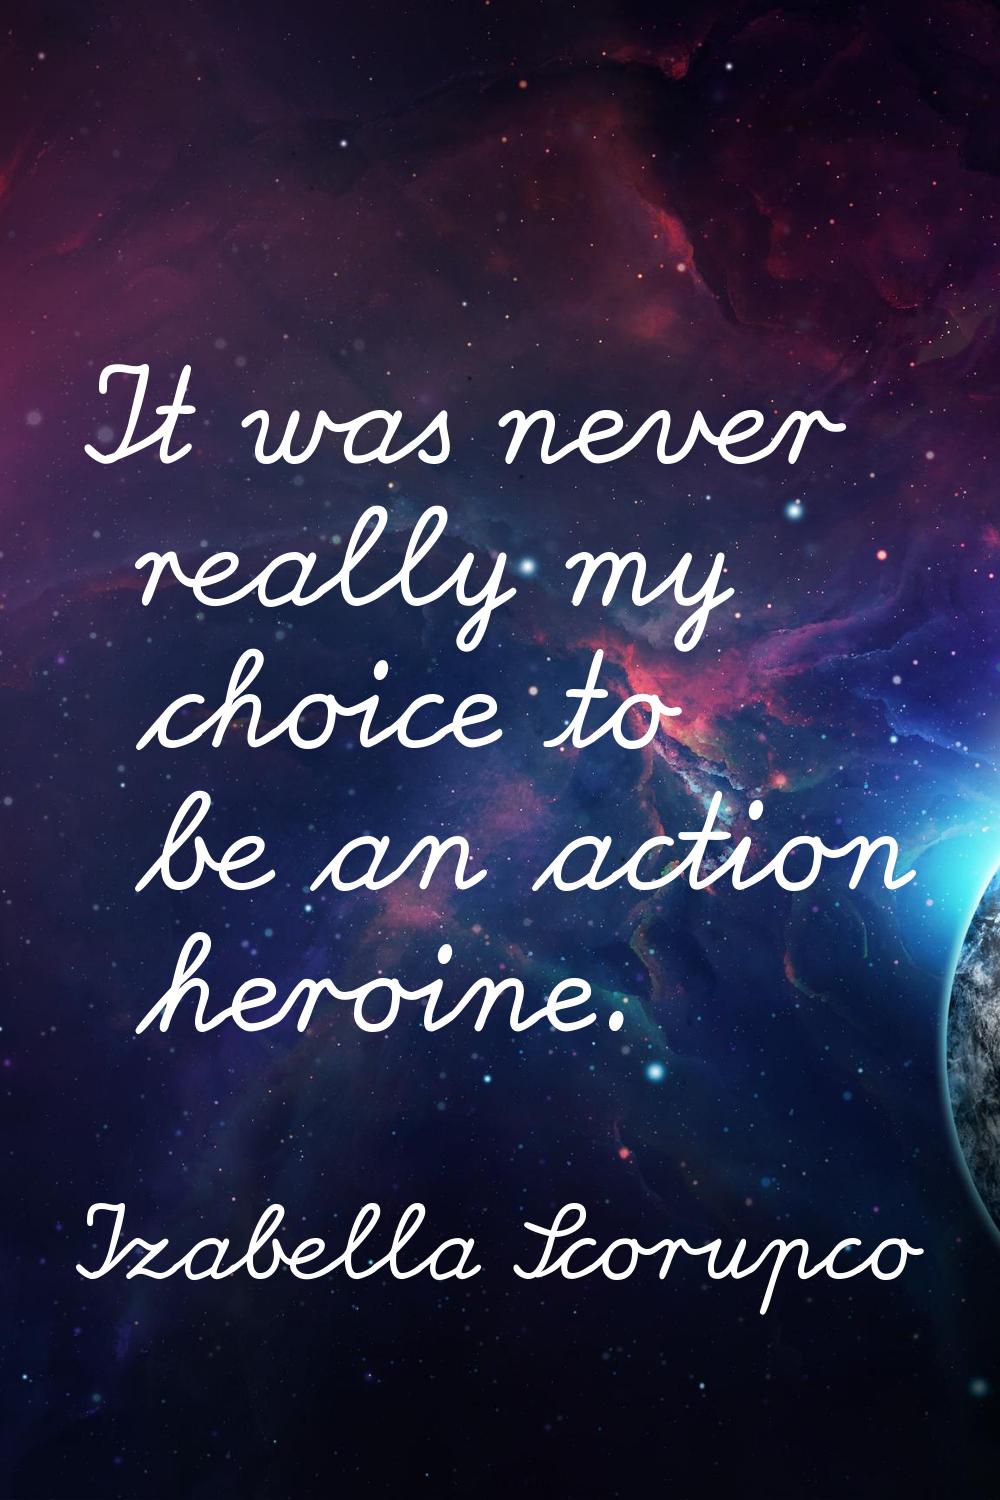 It was never really my choice to be an action heroine.